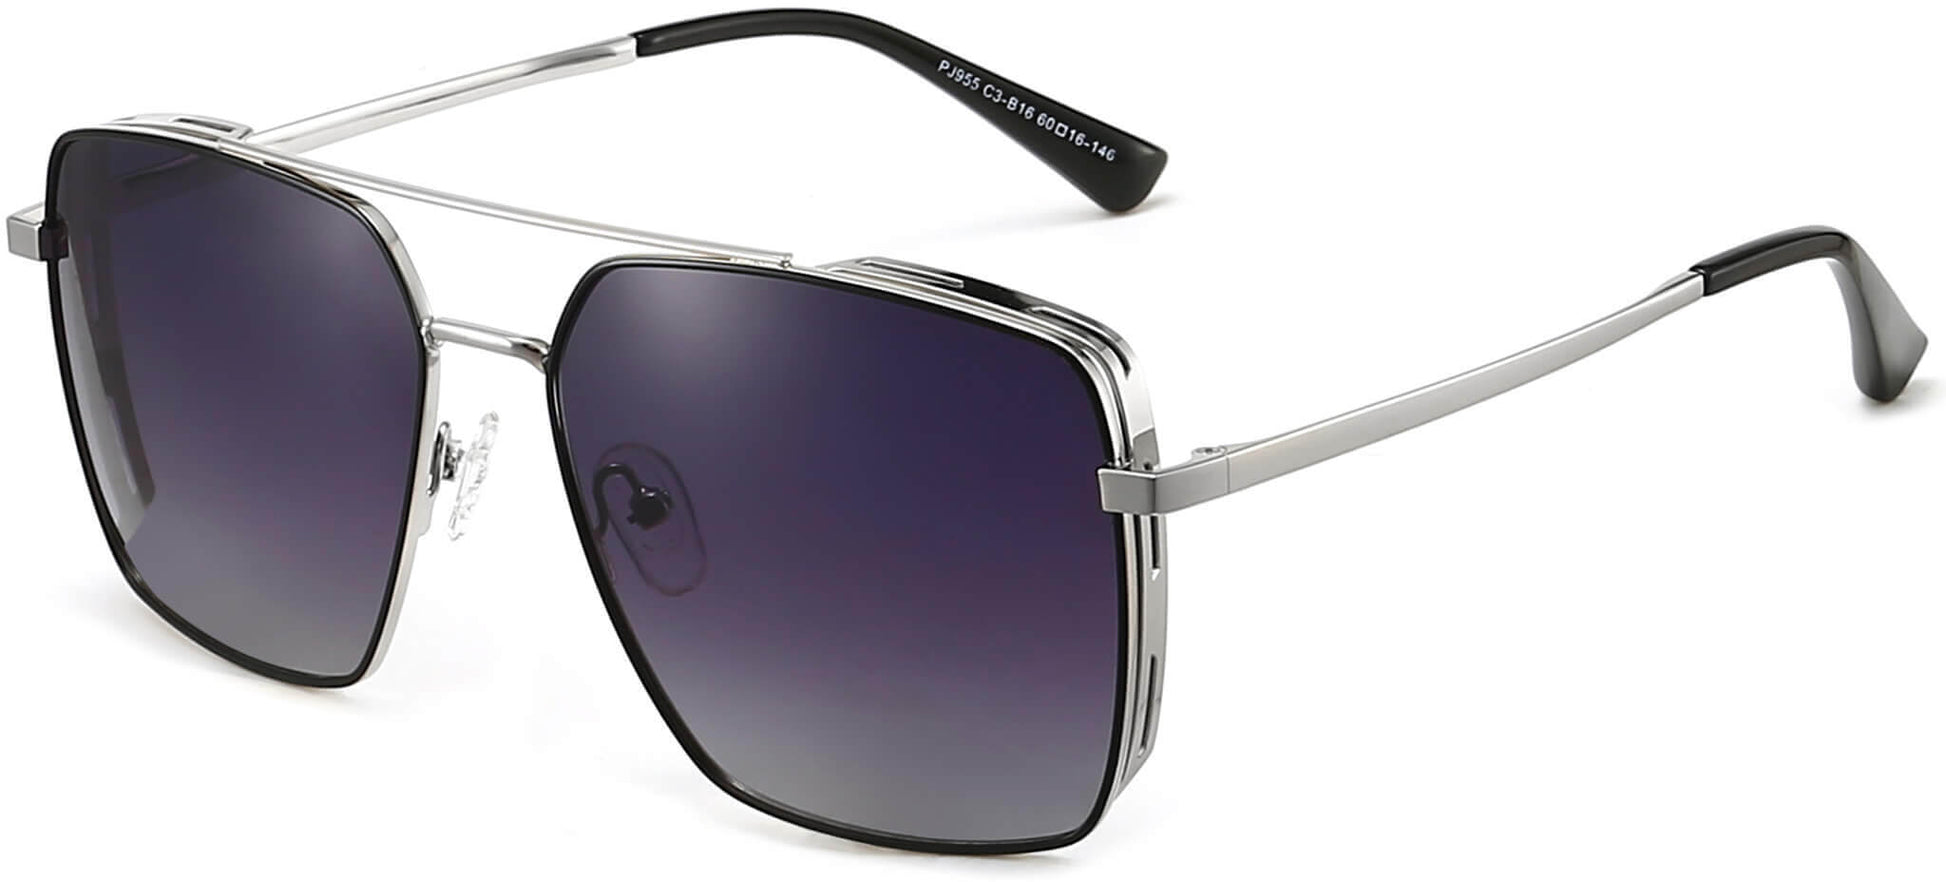 Ace Silver Stainless steel Sunglasses from ANRRI, angle view